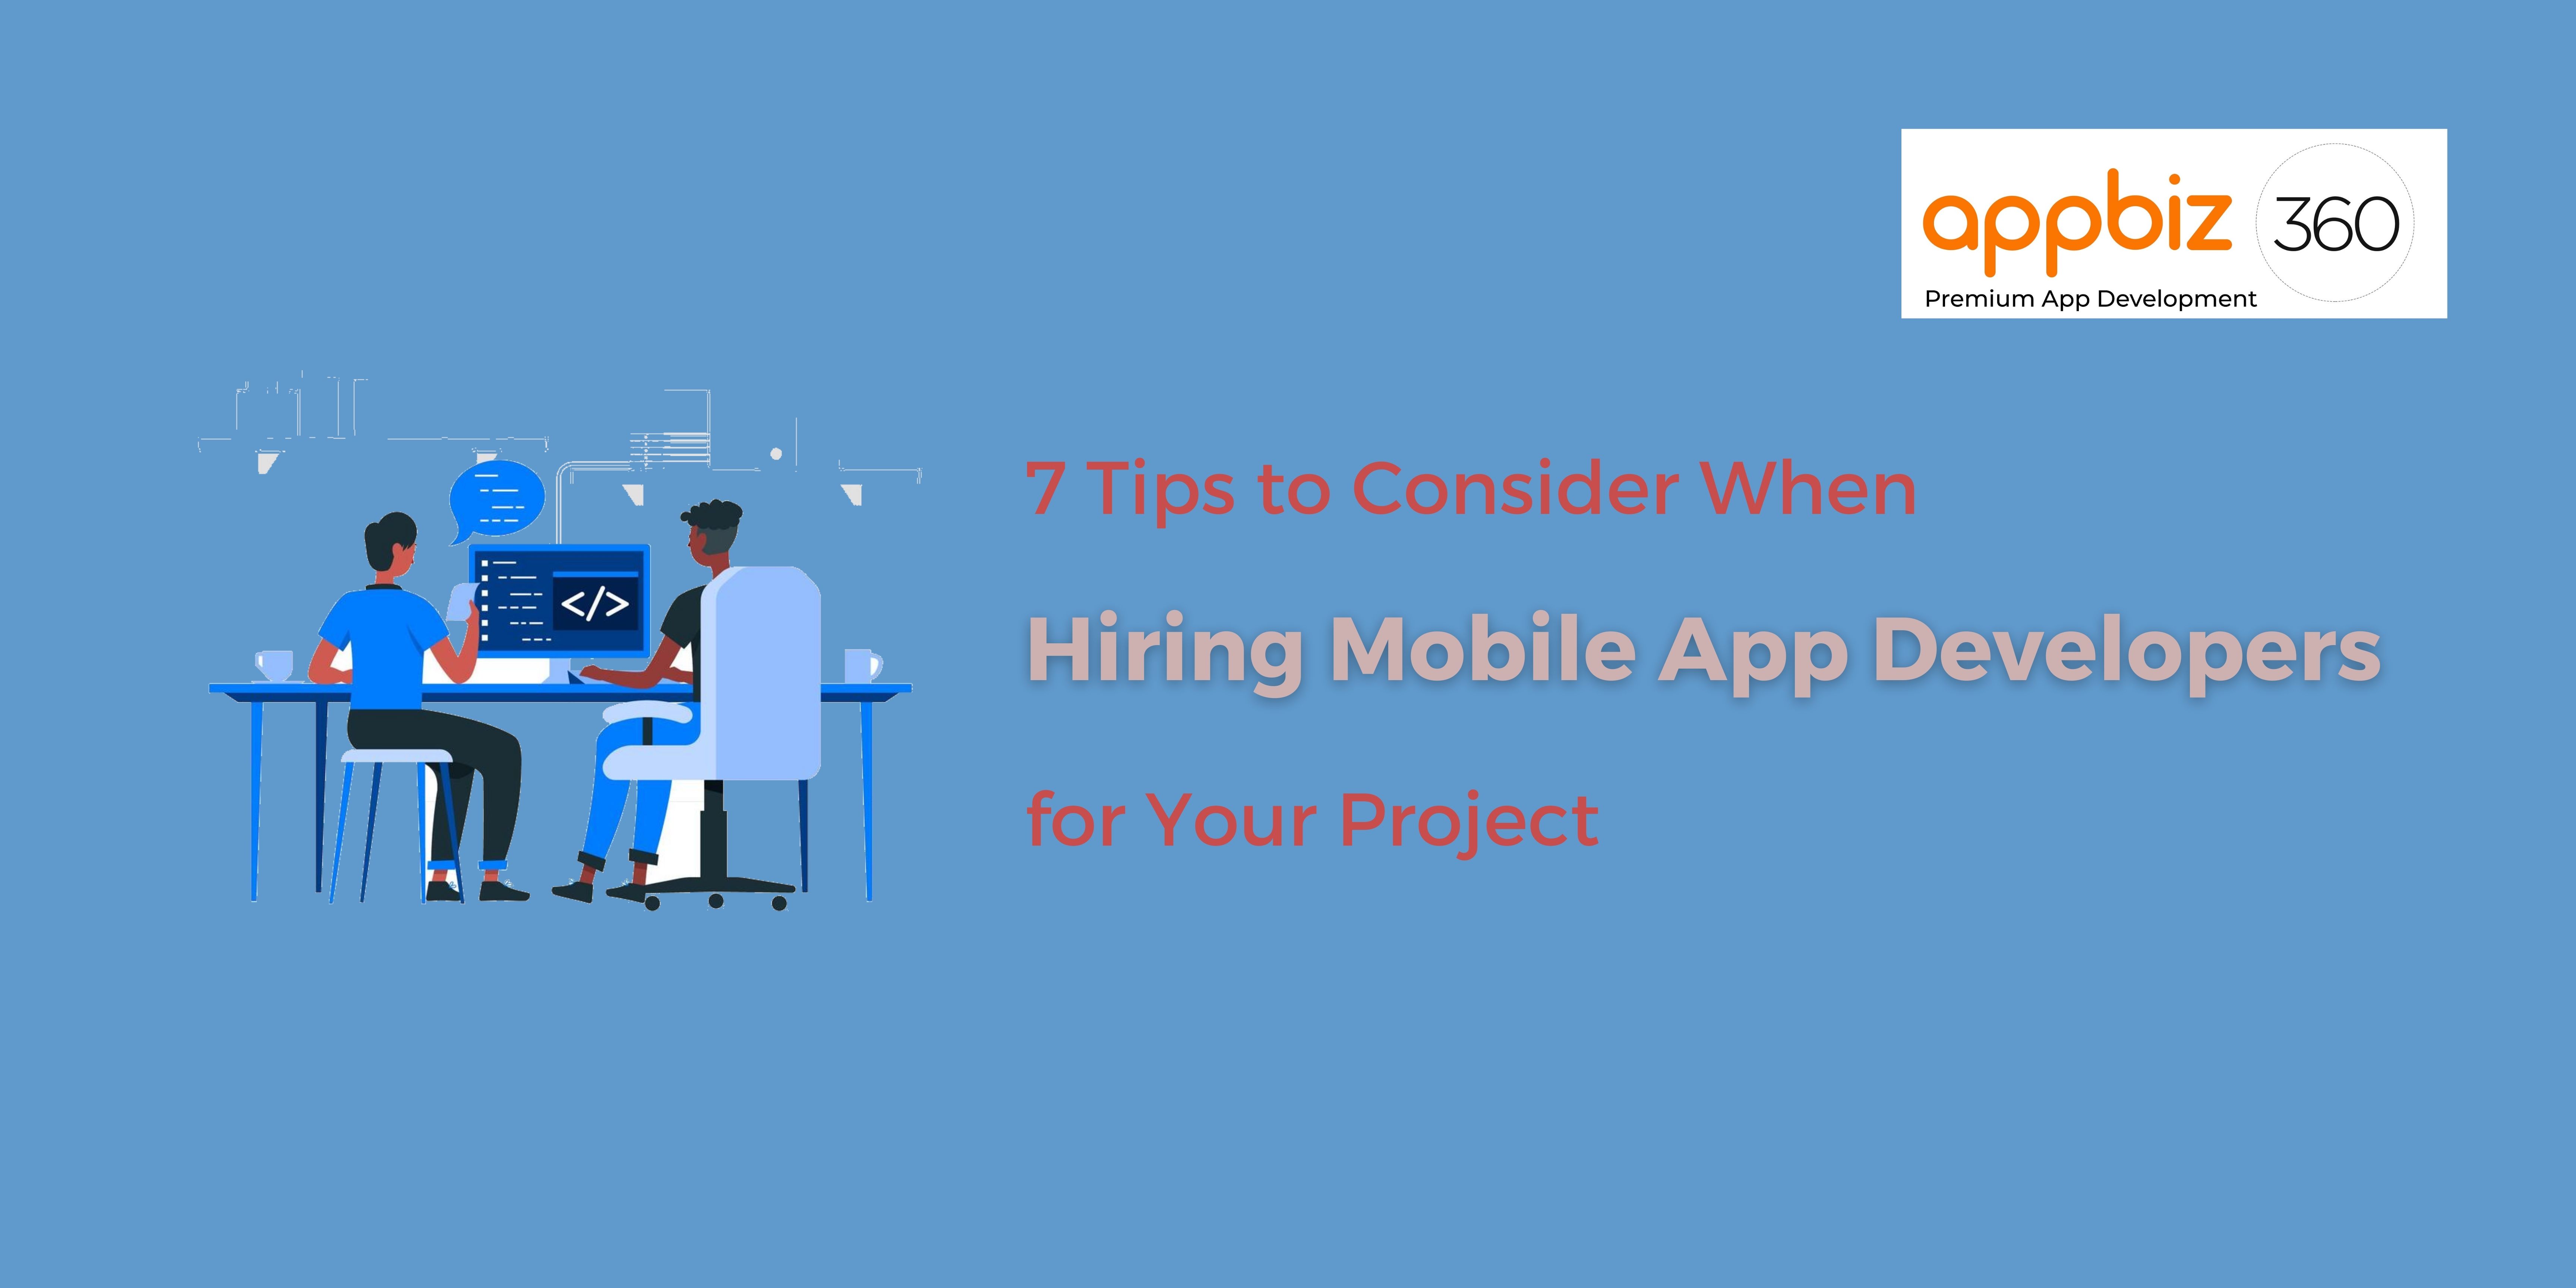 7 Tips to Consider When Hiring Mobile App Developers for Your Project